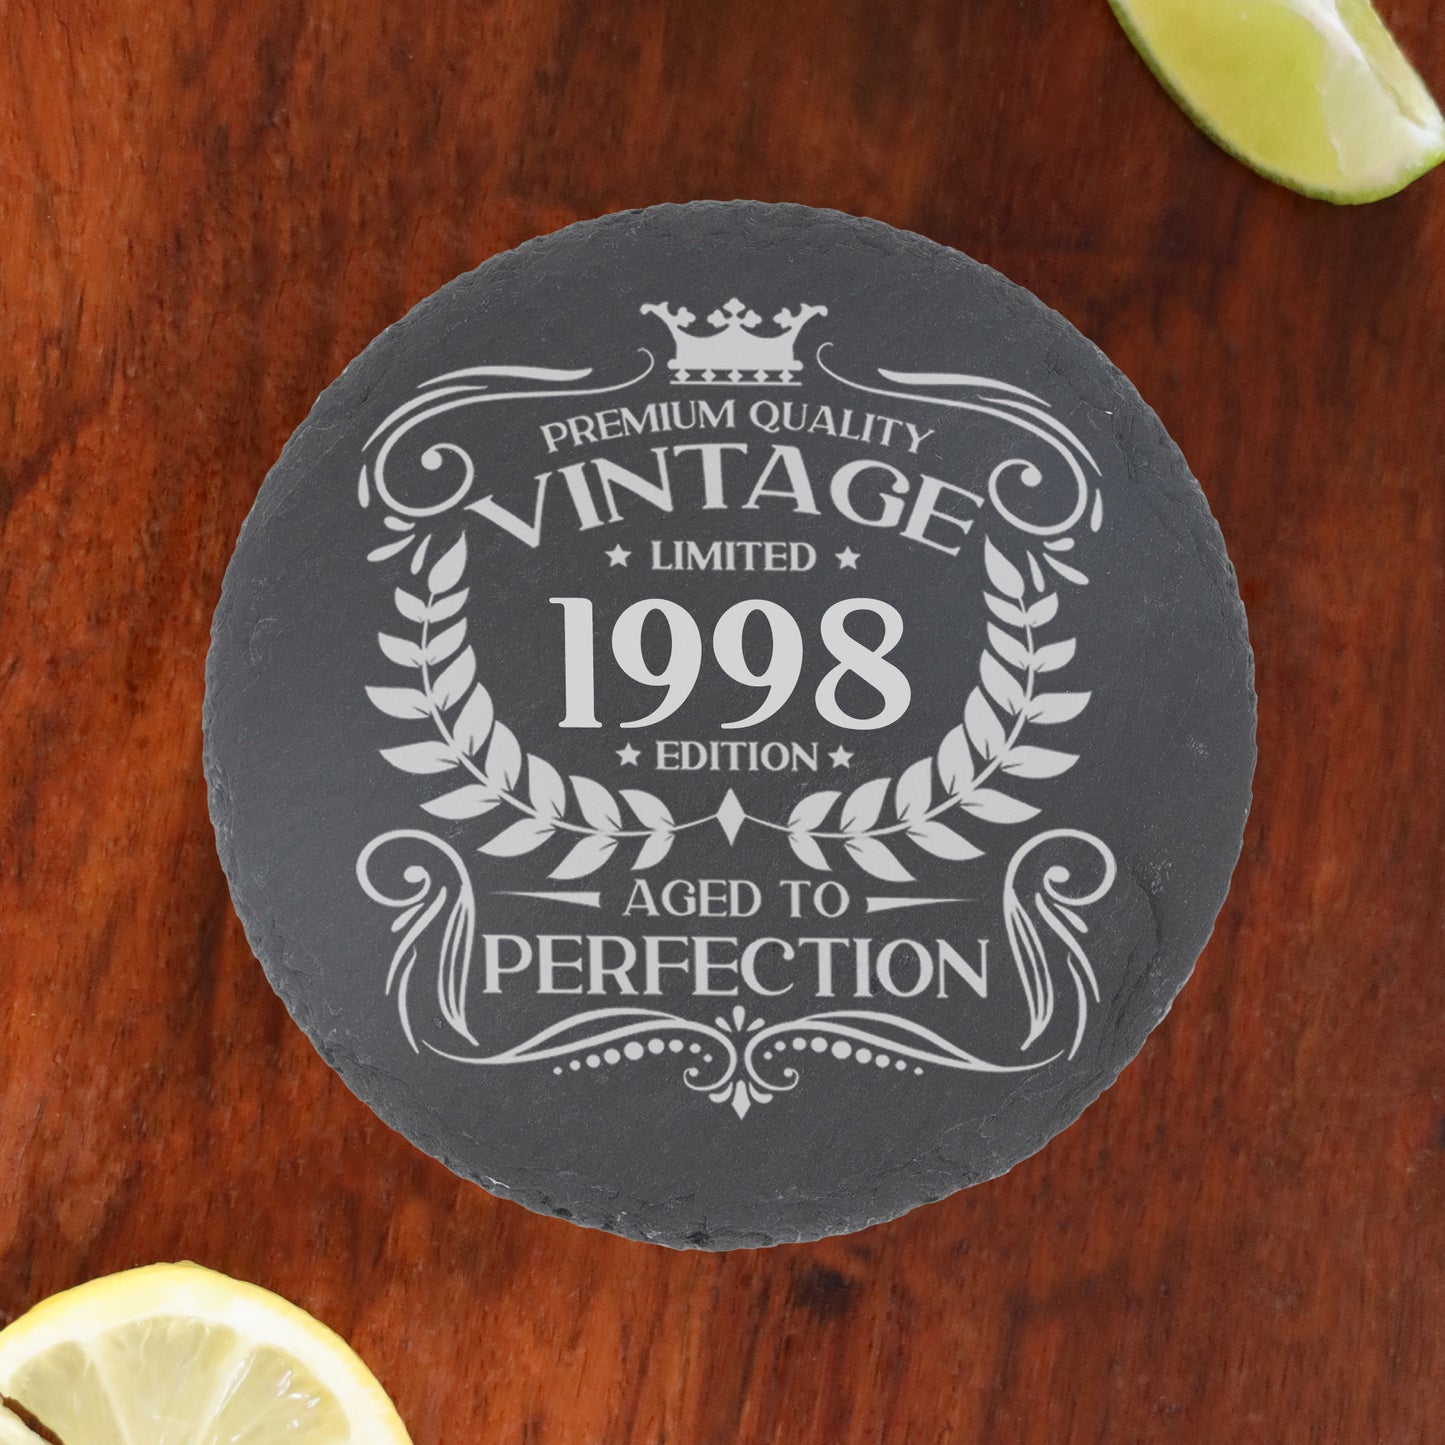 Personalised Vintage 1998 Mug and/or Coaster  - Always Looking Good - Round Coaster On Its Own  